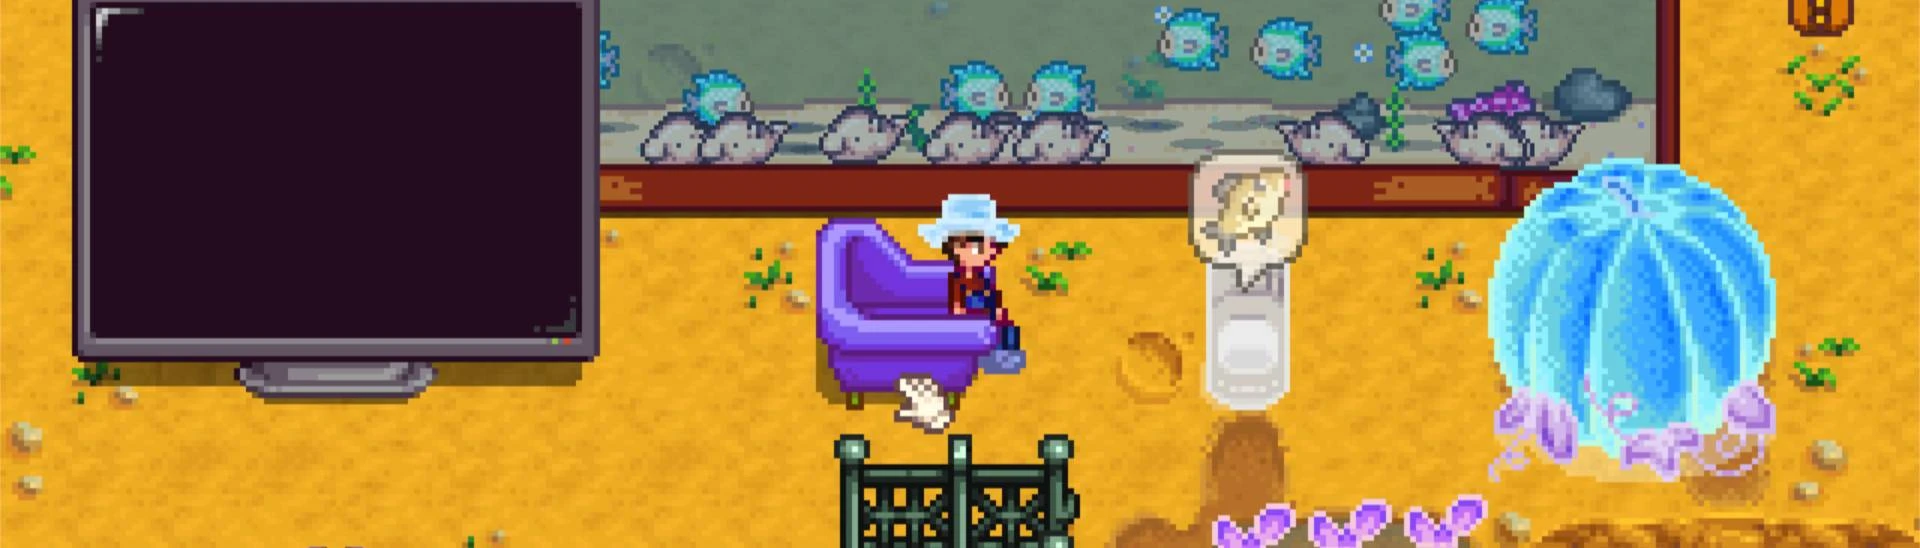 How to Get a Pearl in Stardew Valley (5 Methods and Benefits)